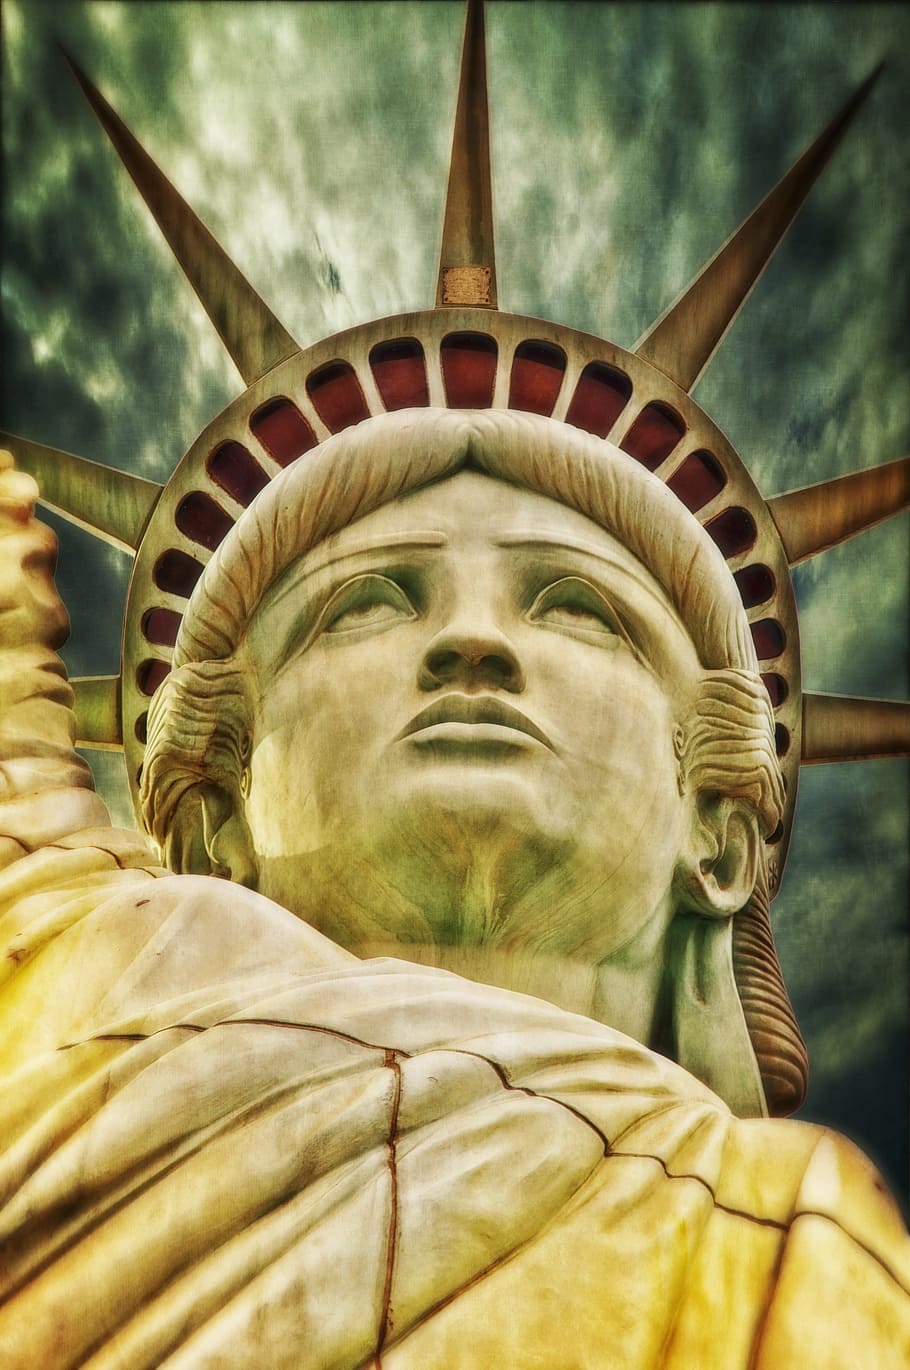 statue of liberty, liberty statue, freiheits statue, new york, usa, monument, tourist attraction, place, outdoor, beautiful